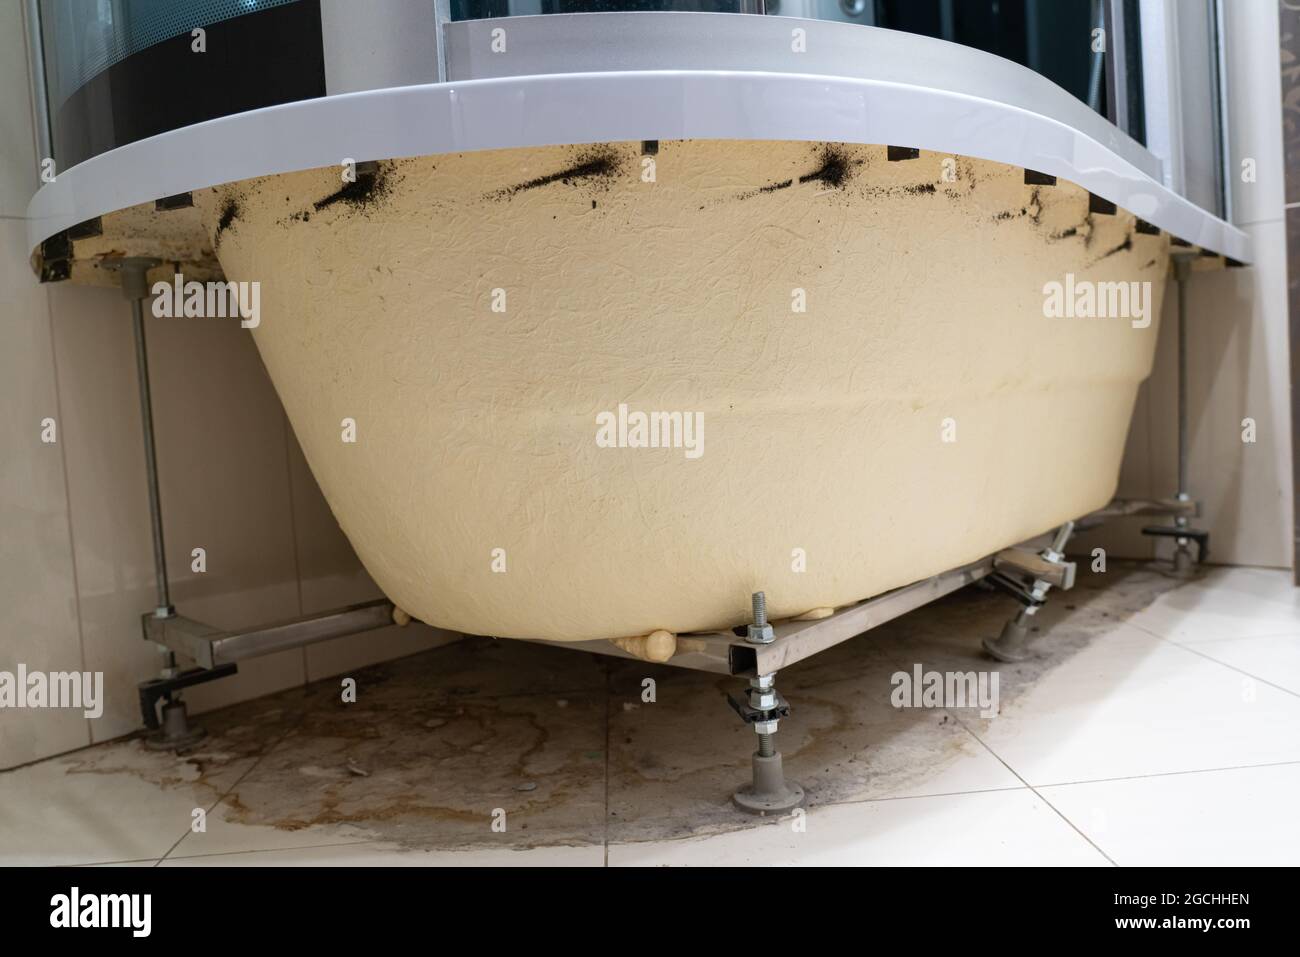 dirty puddle, dirt, hair, dust, mold, bacteria, fungus on the floor under the bathroom. inner side of acrylic bathtub without decorative panel. rusty Stock Photo